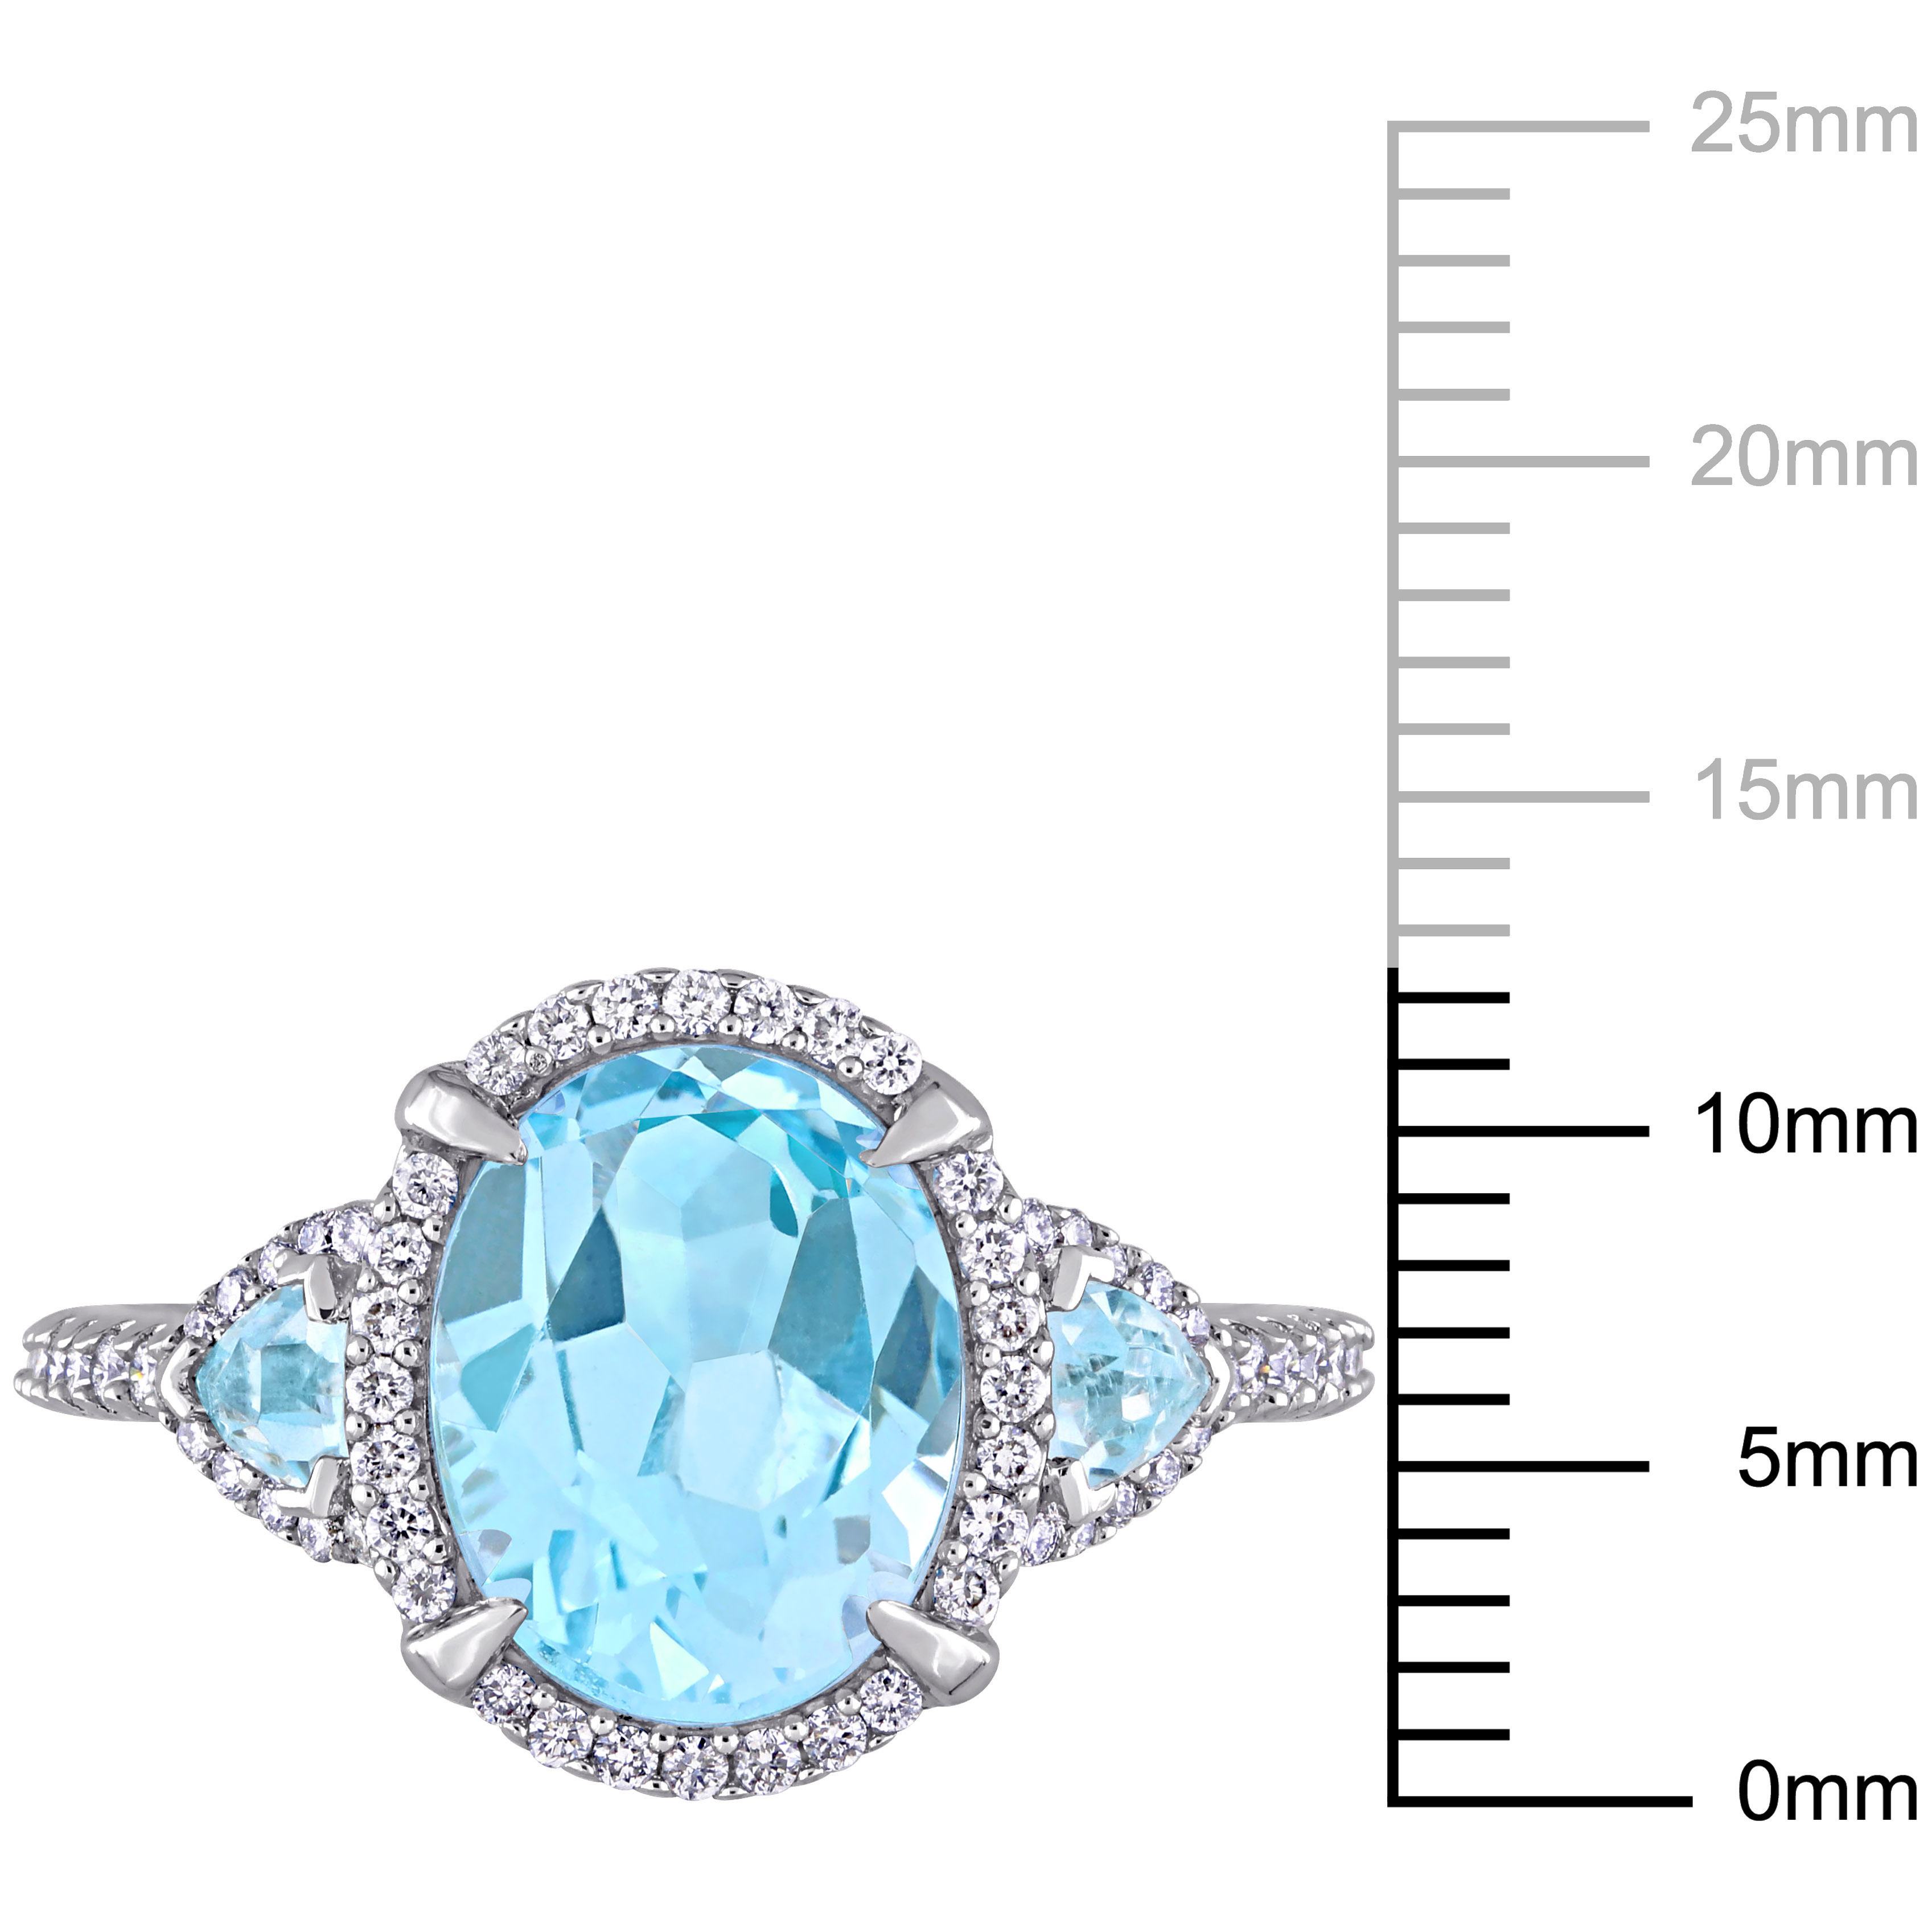 Miabella Women's 4 Carat T.G.W. Oval-Cut and Trilliant-Cut Sky Blue Topaz and 1/4 Carat T.W. Round-Cut Diamond 14kt White Gold Halo Ring - image 2 of 8